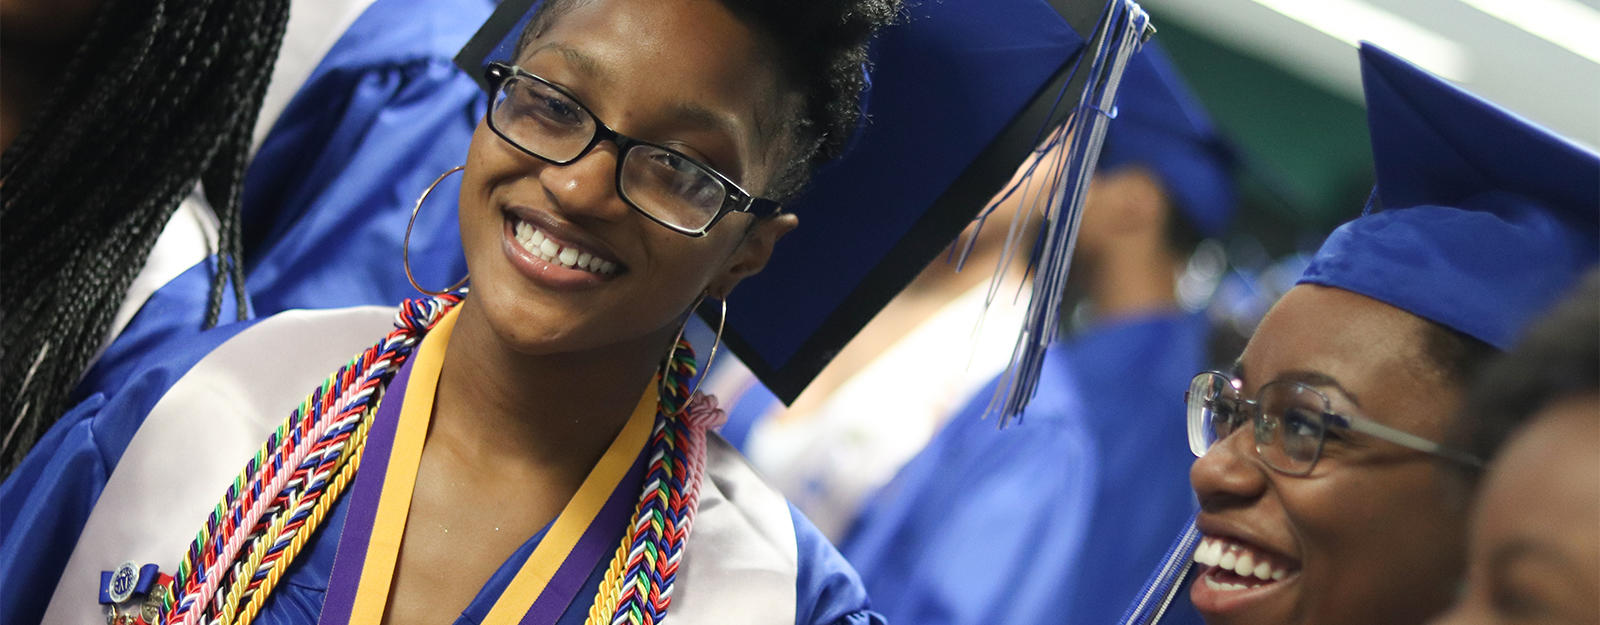 Student smiling at graduation with multiple academic cords on their robe.